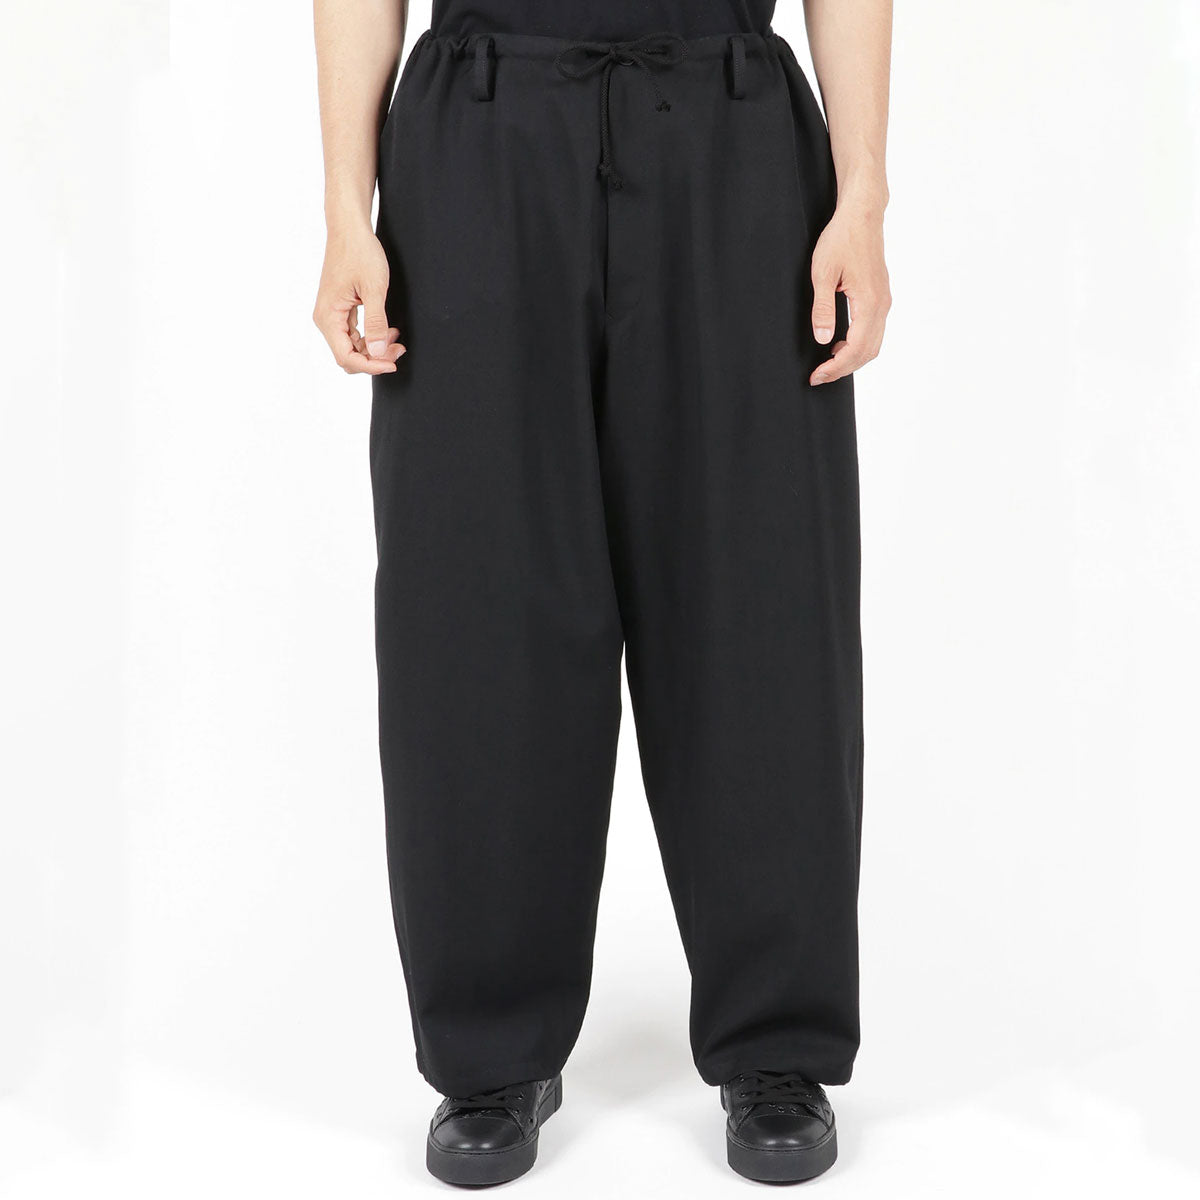 W/GABARDINE WIDE STRINGS PANTS - Why are you here?